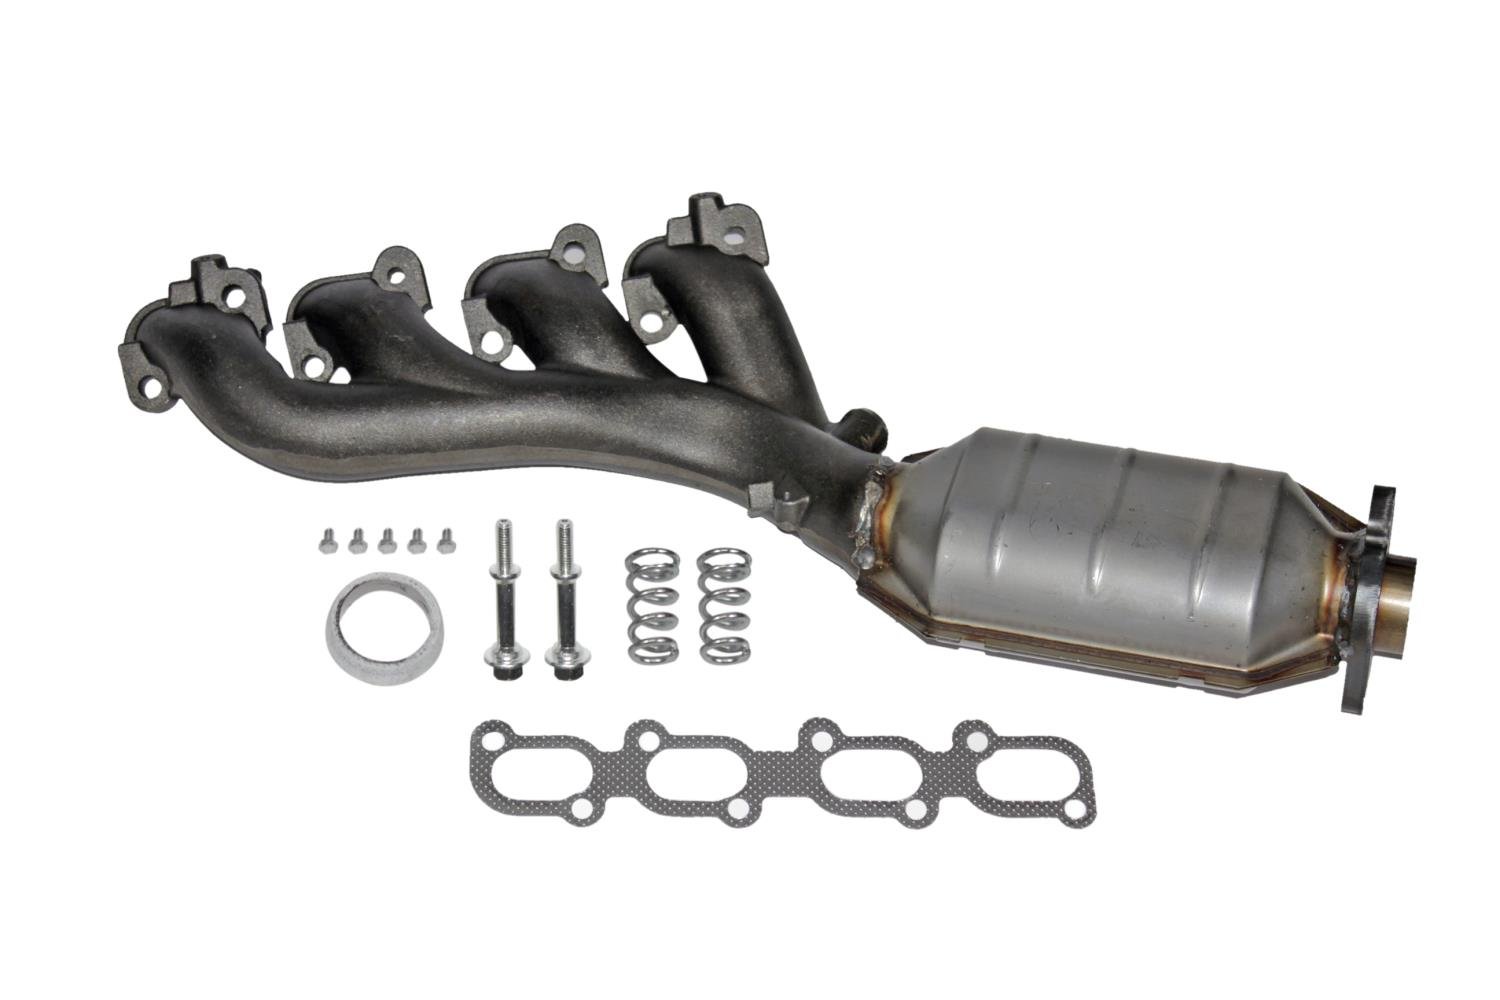 Catalytic Converter Fits 2004-2009 Cadillac SRX, 2005-2010 Cadillac STS w/4.6L V8 Eng. [Front Left]